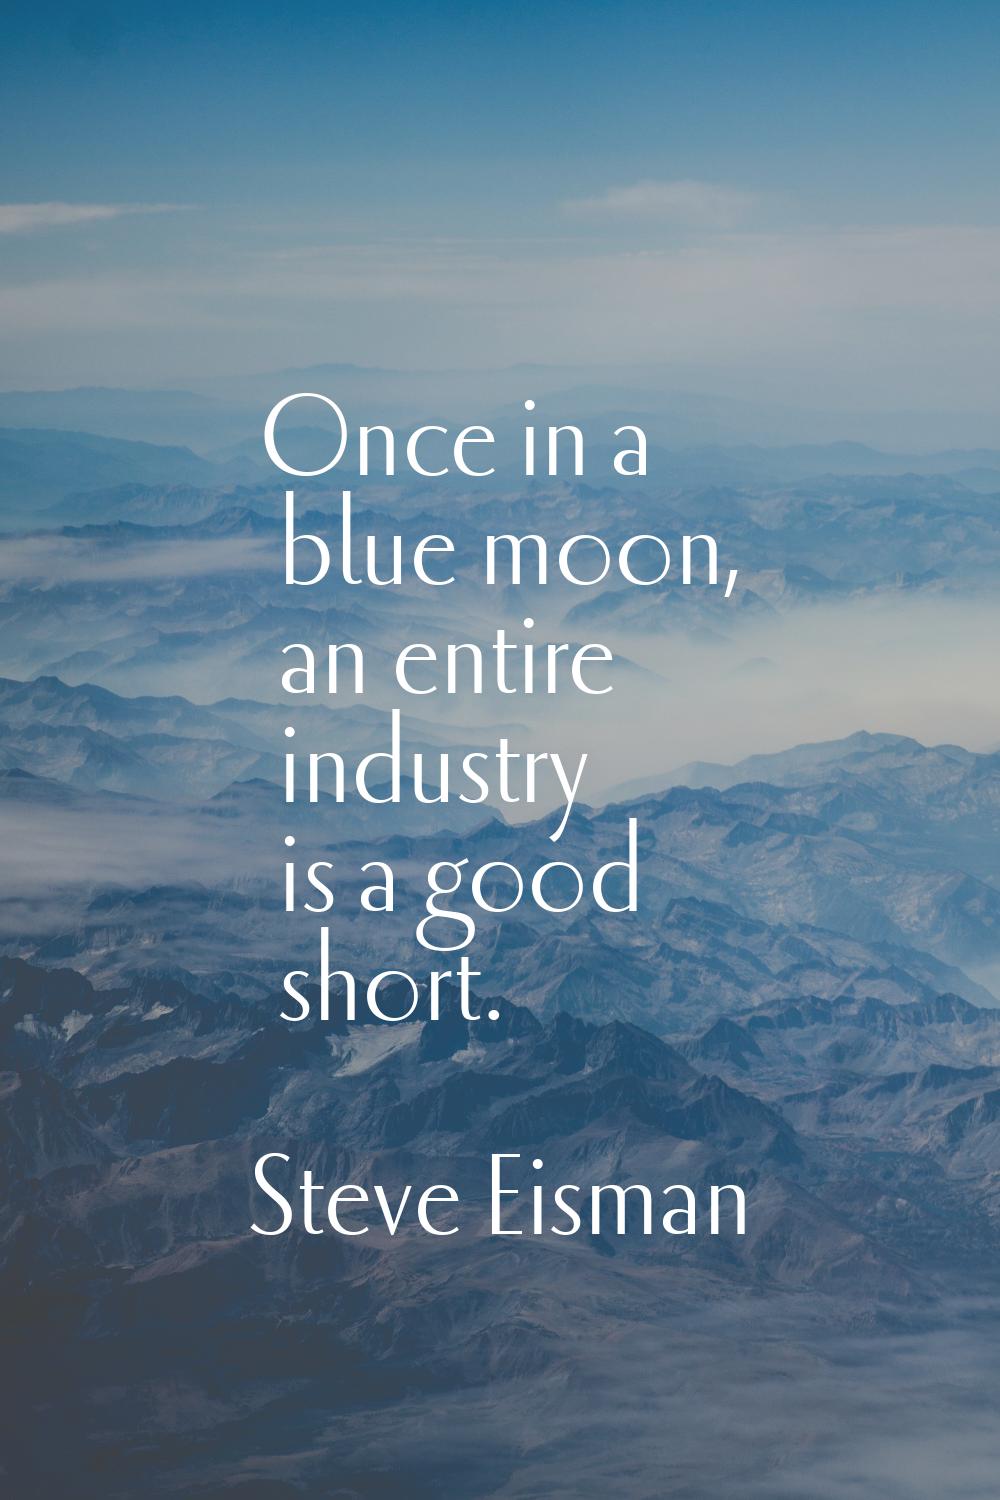 Once in a blue moon, an entire industry is a good short.